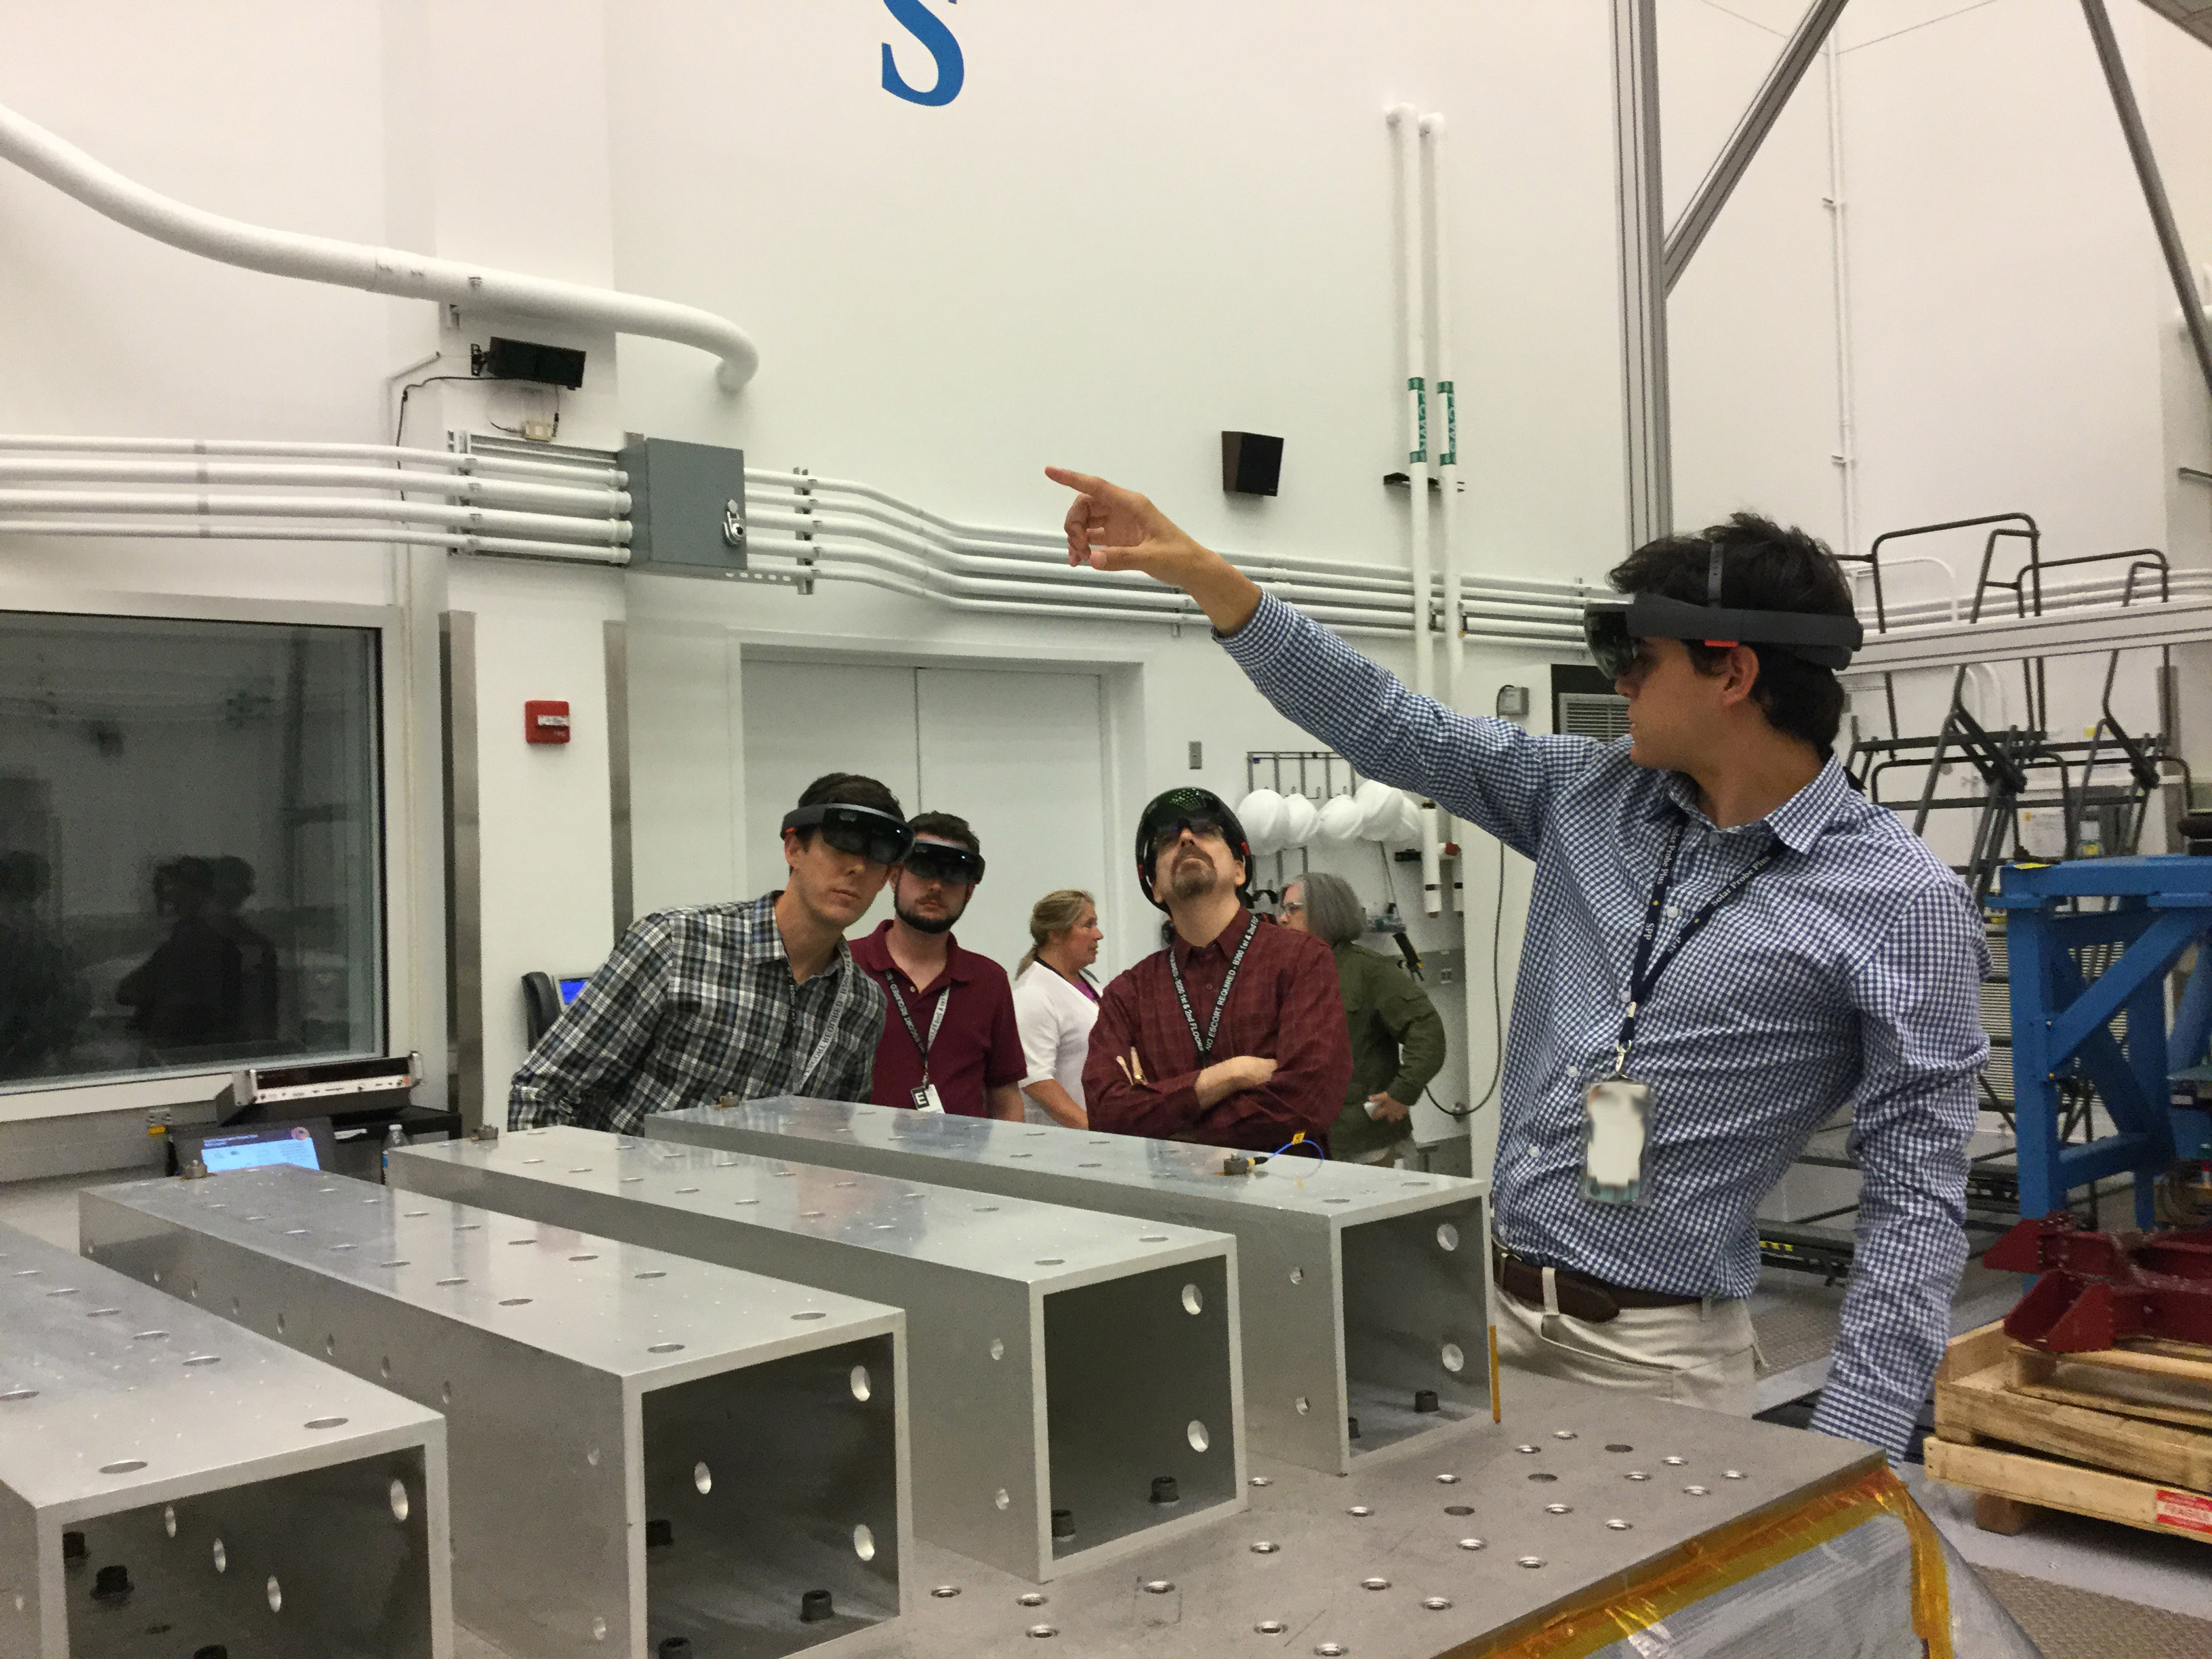 Felipe Ruiz, of Johns Hopkins APL, points to a section of the Parker Solar Probe spacecraft visible only to the group wearing HoloLens augmented reality glasses.